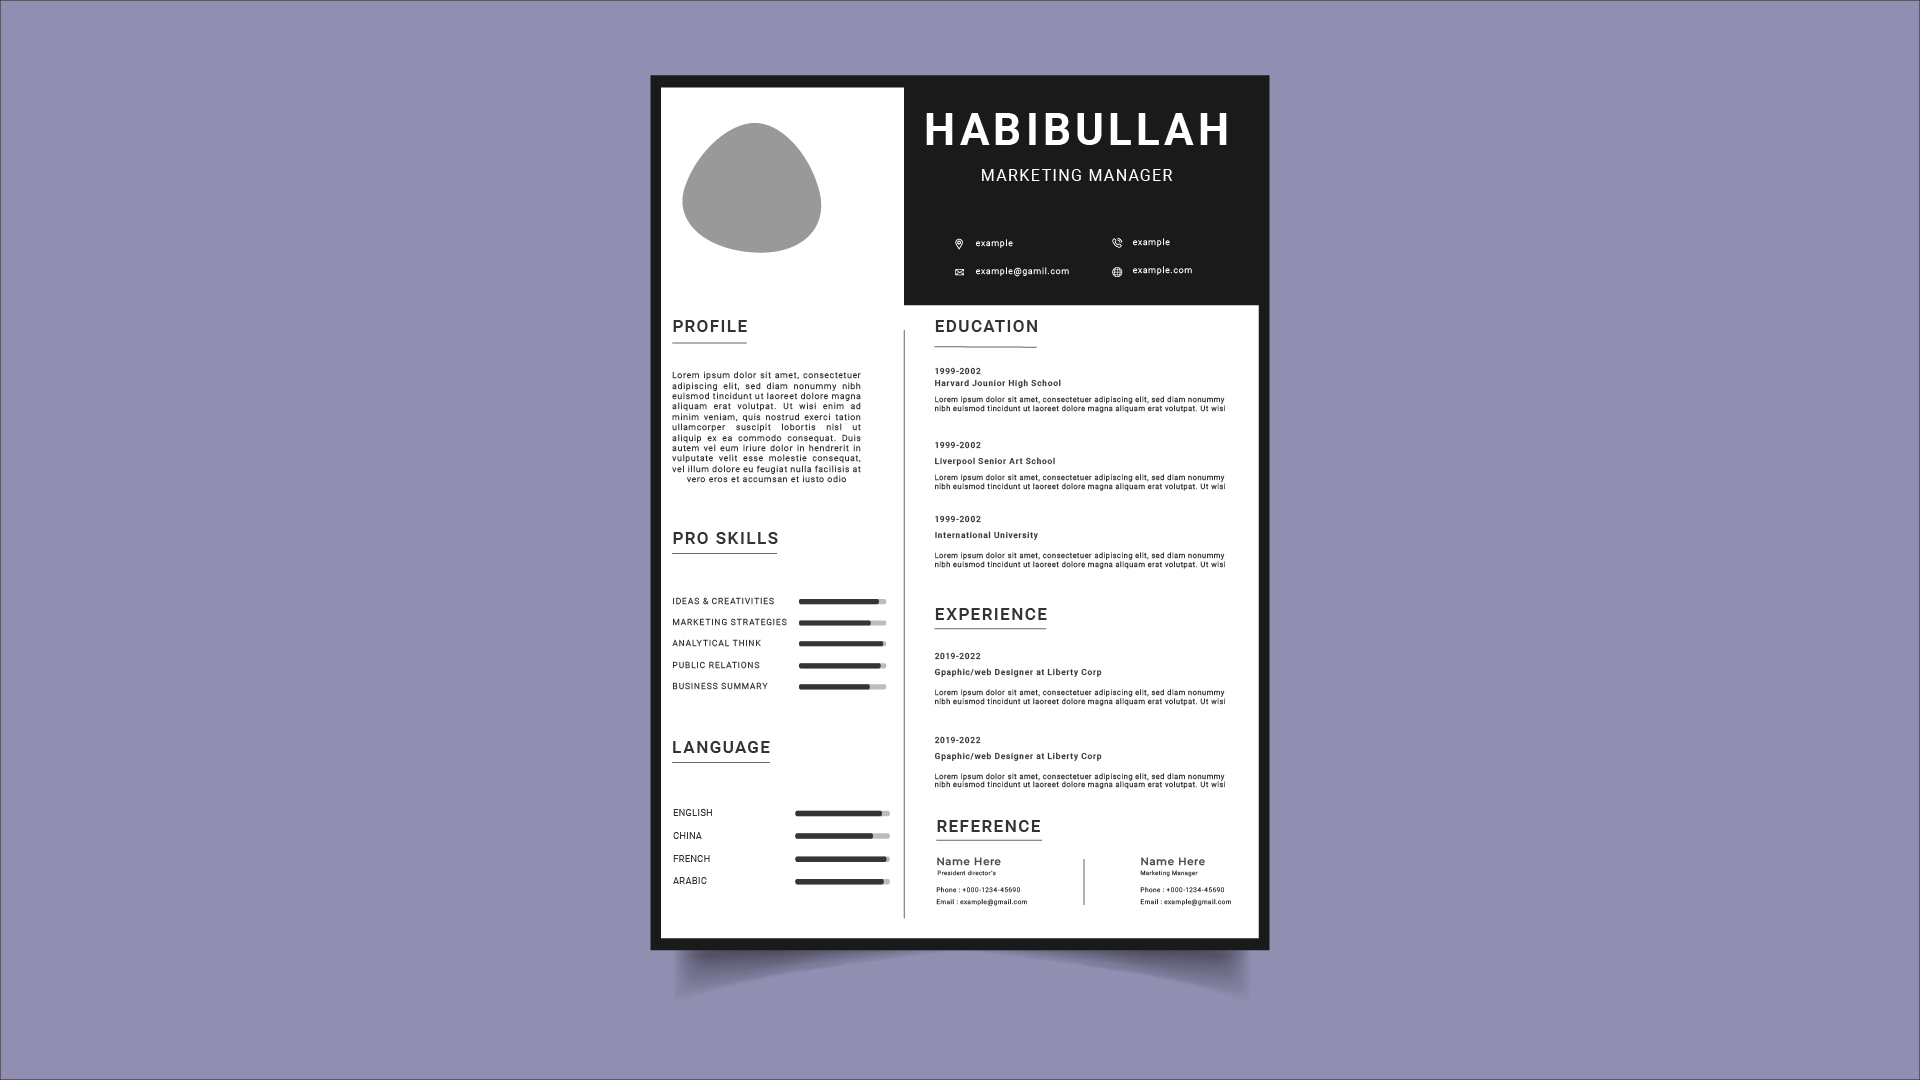 Black and white resume on a purple background.